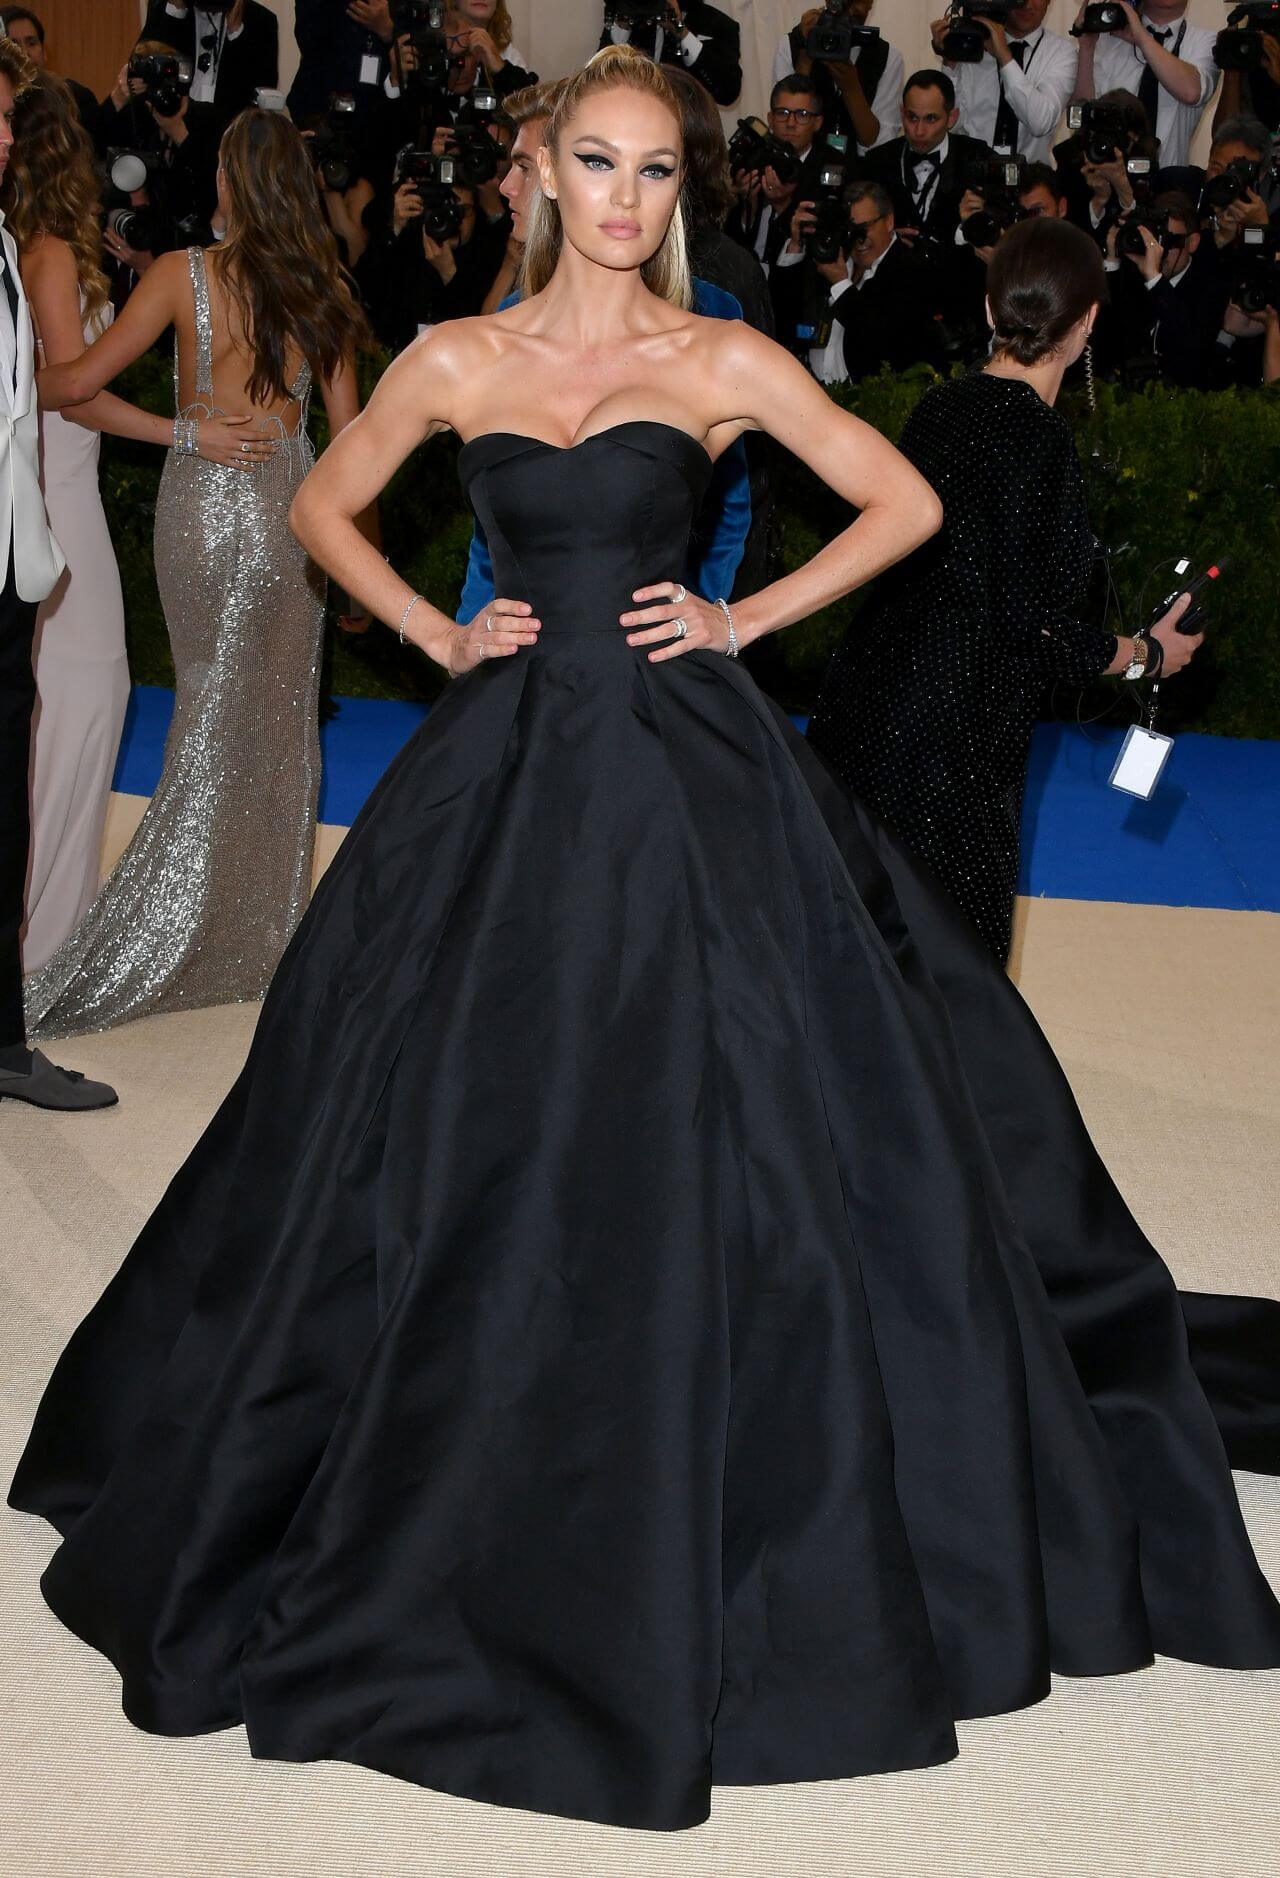 Candice Swanepoel Bold  In Black Strapless Long Ball Gown Dress At MET Gala in New York